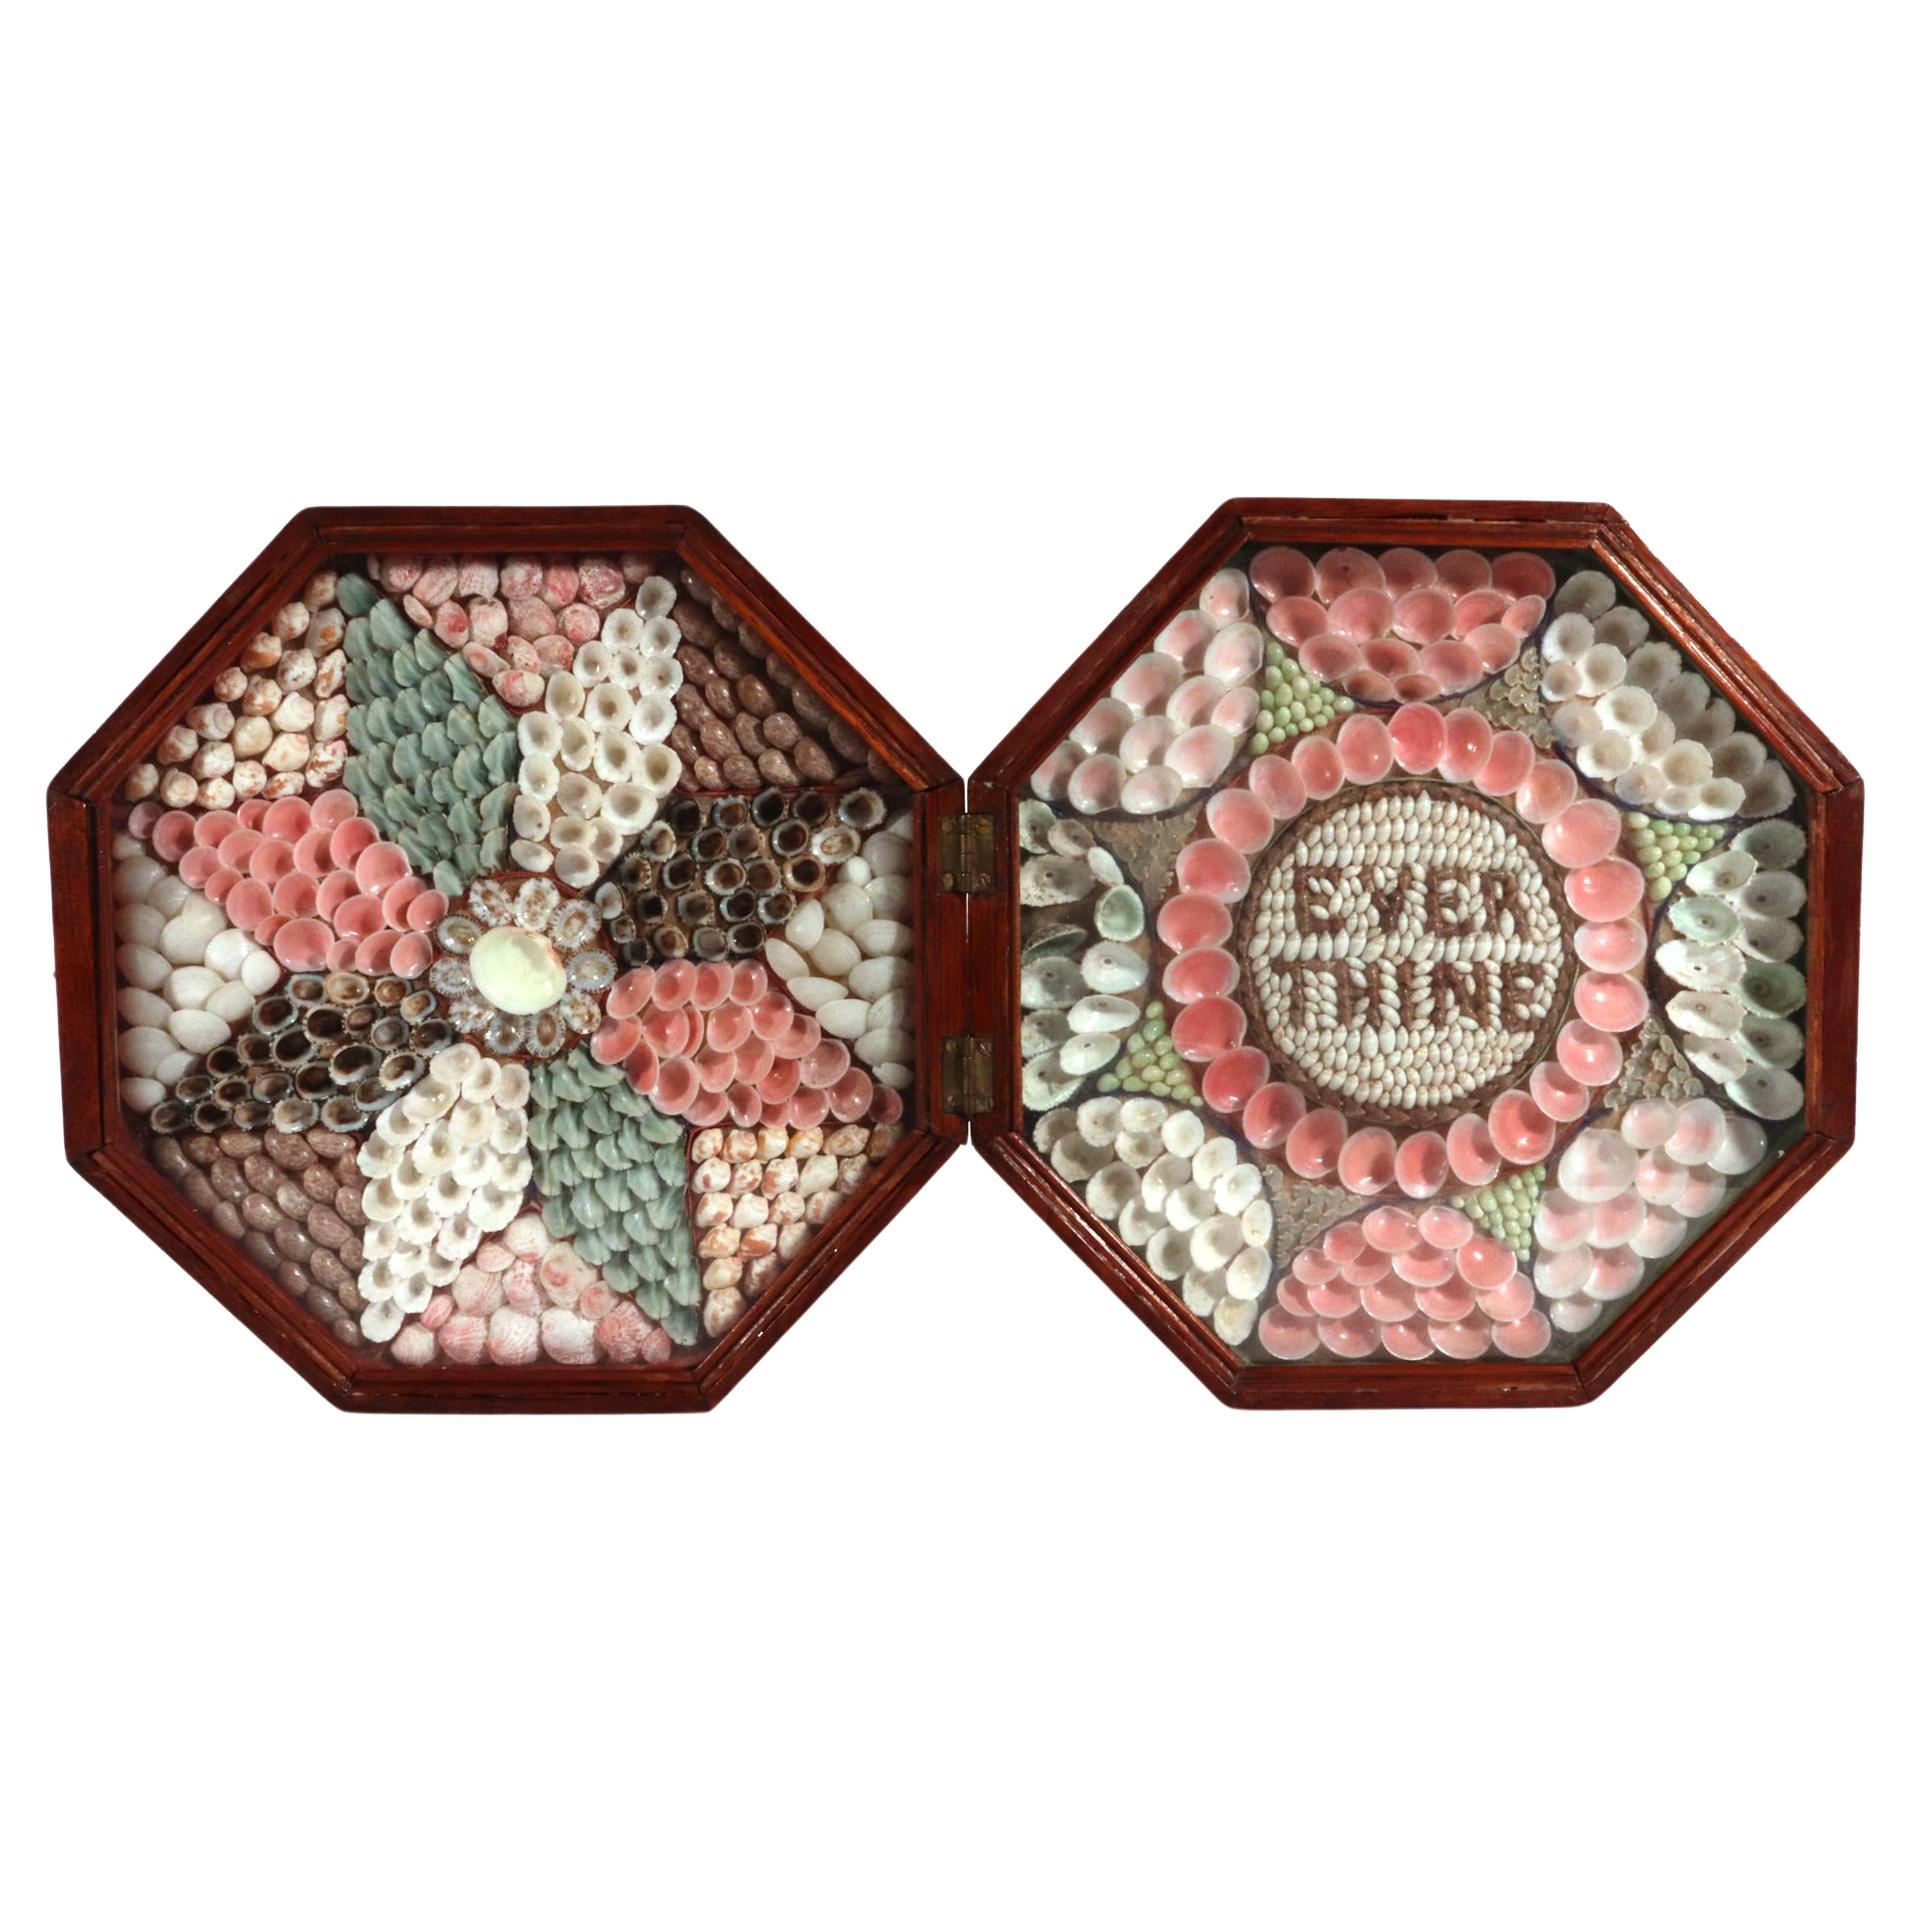 Double Sailor's Valentine of Sea Shells and Motto "Ever Thine"